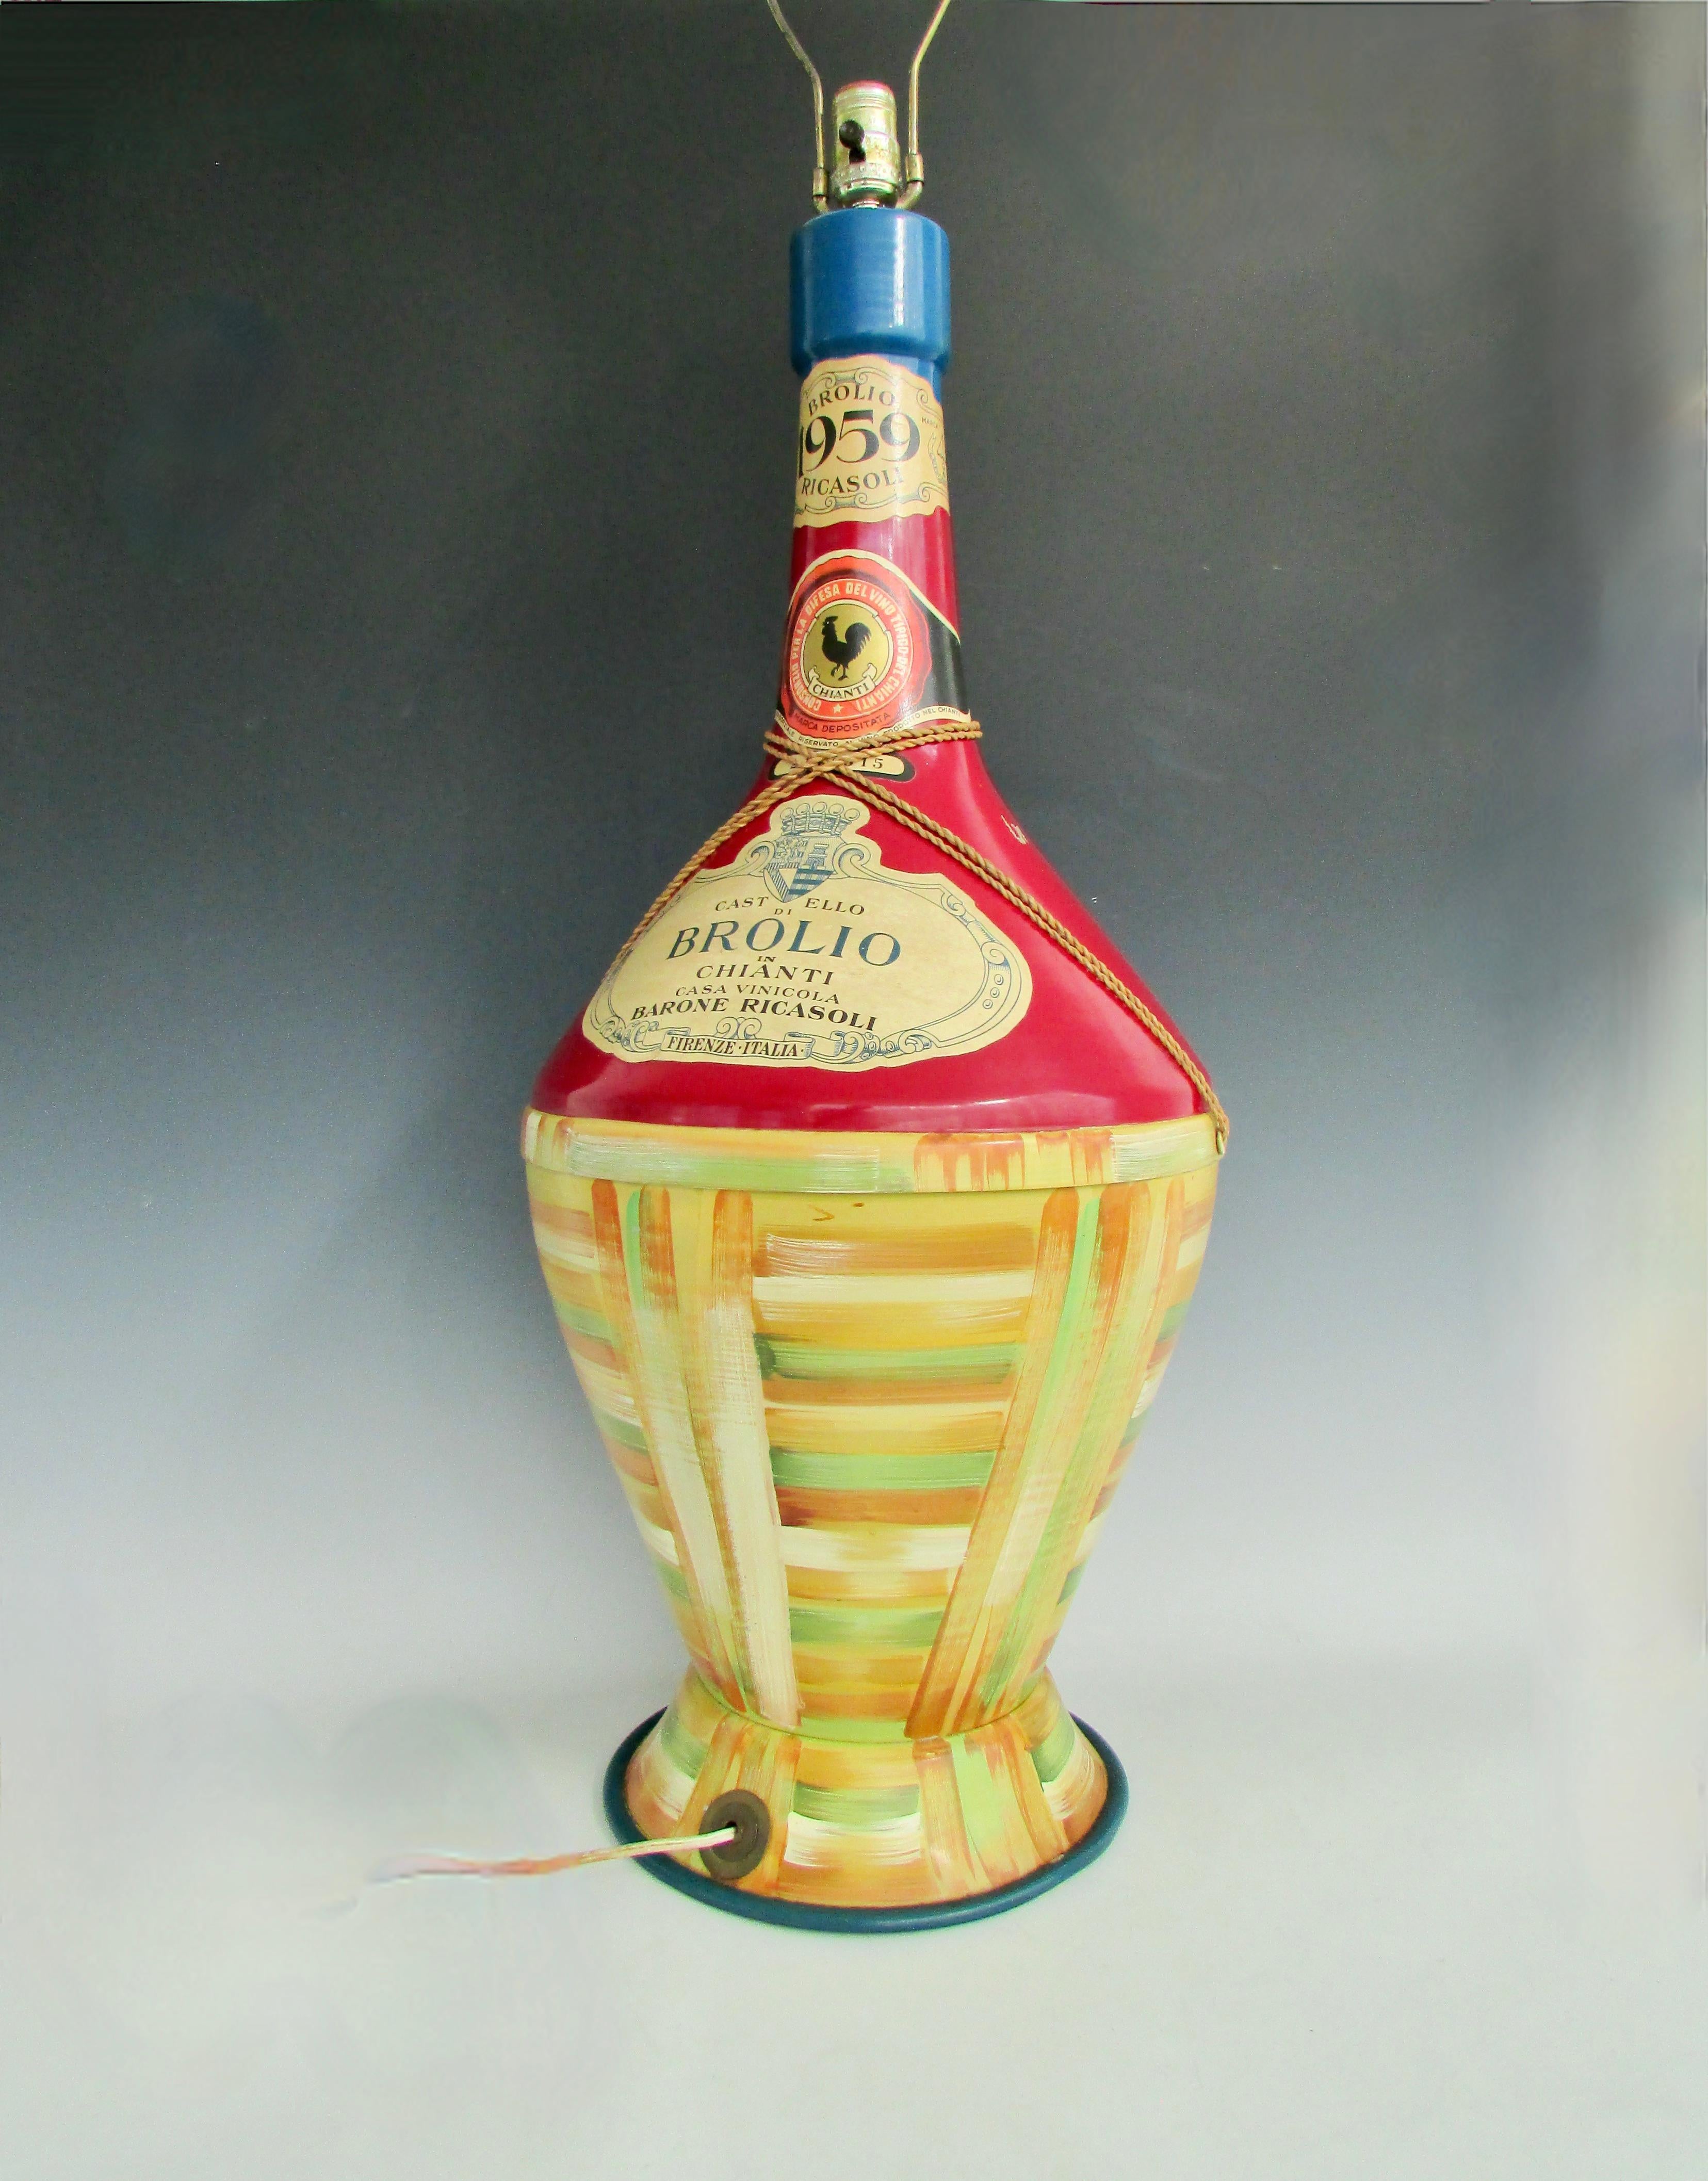 Large pressed steel wine chianti bottle table lamp. Hand painted design with printed paper labels. Not sure if this was a store promotional or folk / studio made. Interesting and nice decor for restaurant or home wine cave. Lamp body measures 32